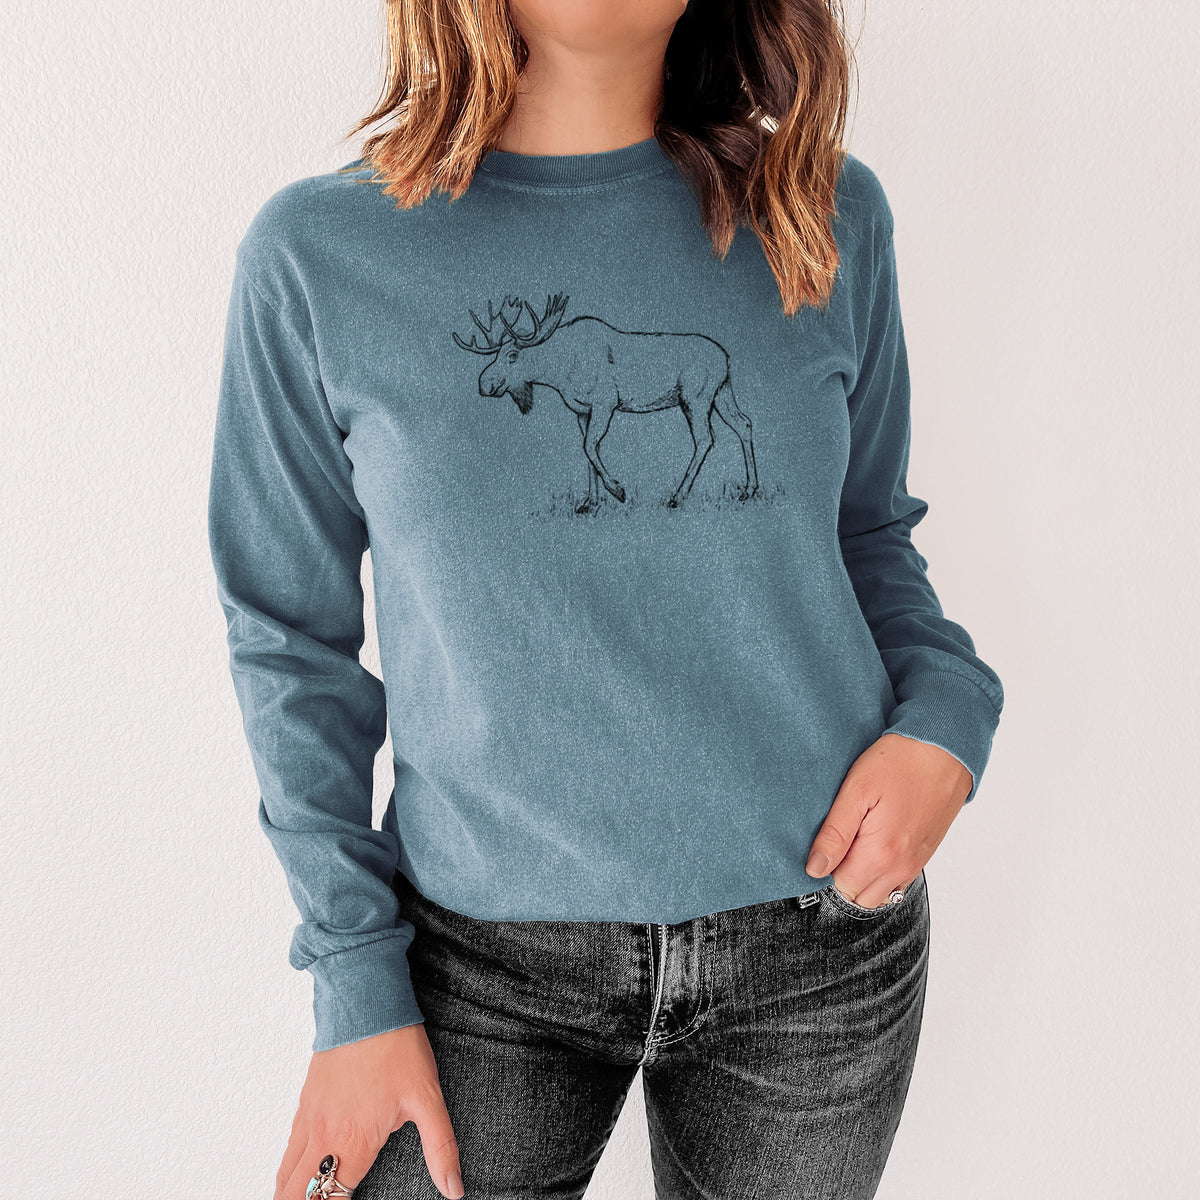 Bull Moose - Alces alces - Heavyweight 100% Cotton Long Sleeve